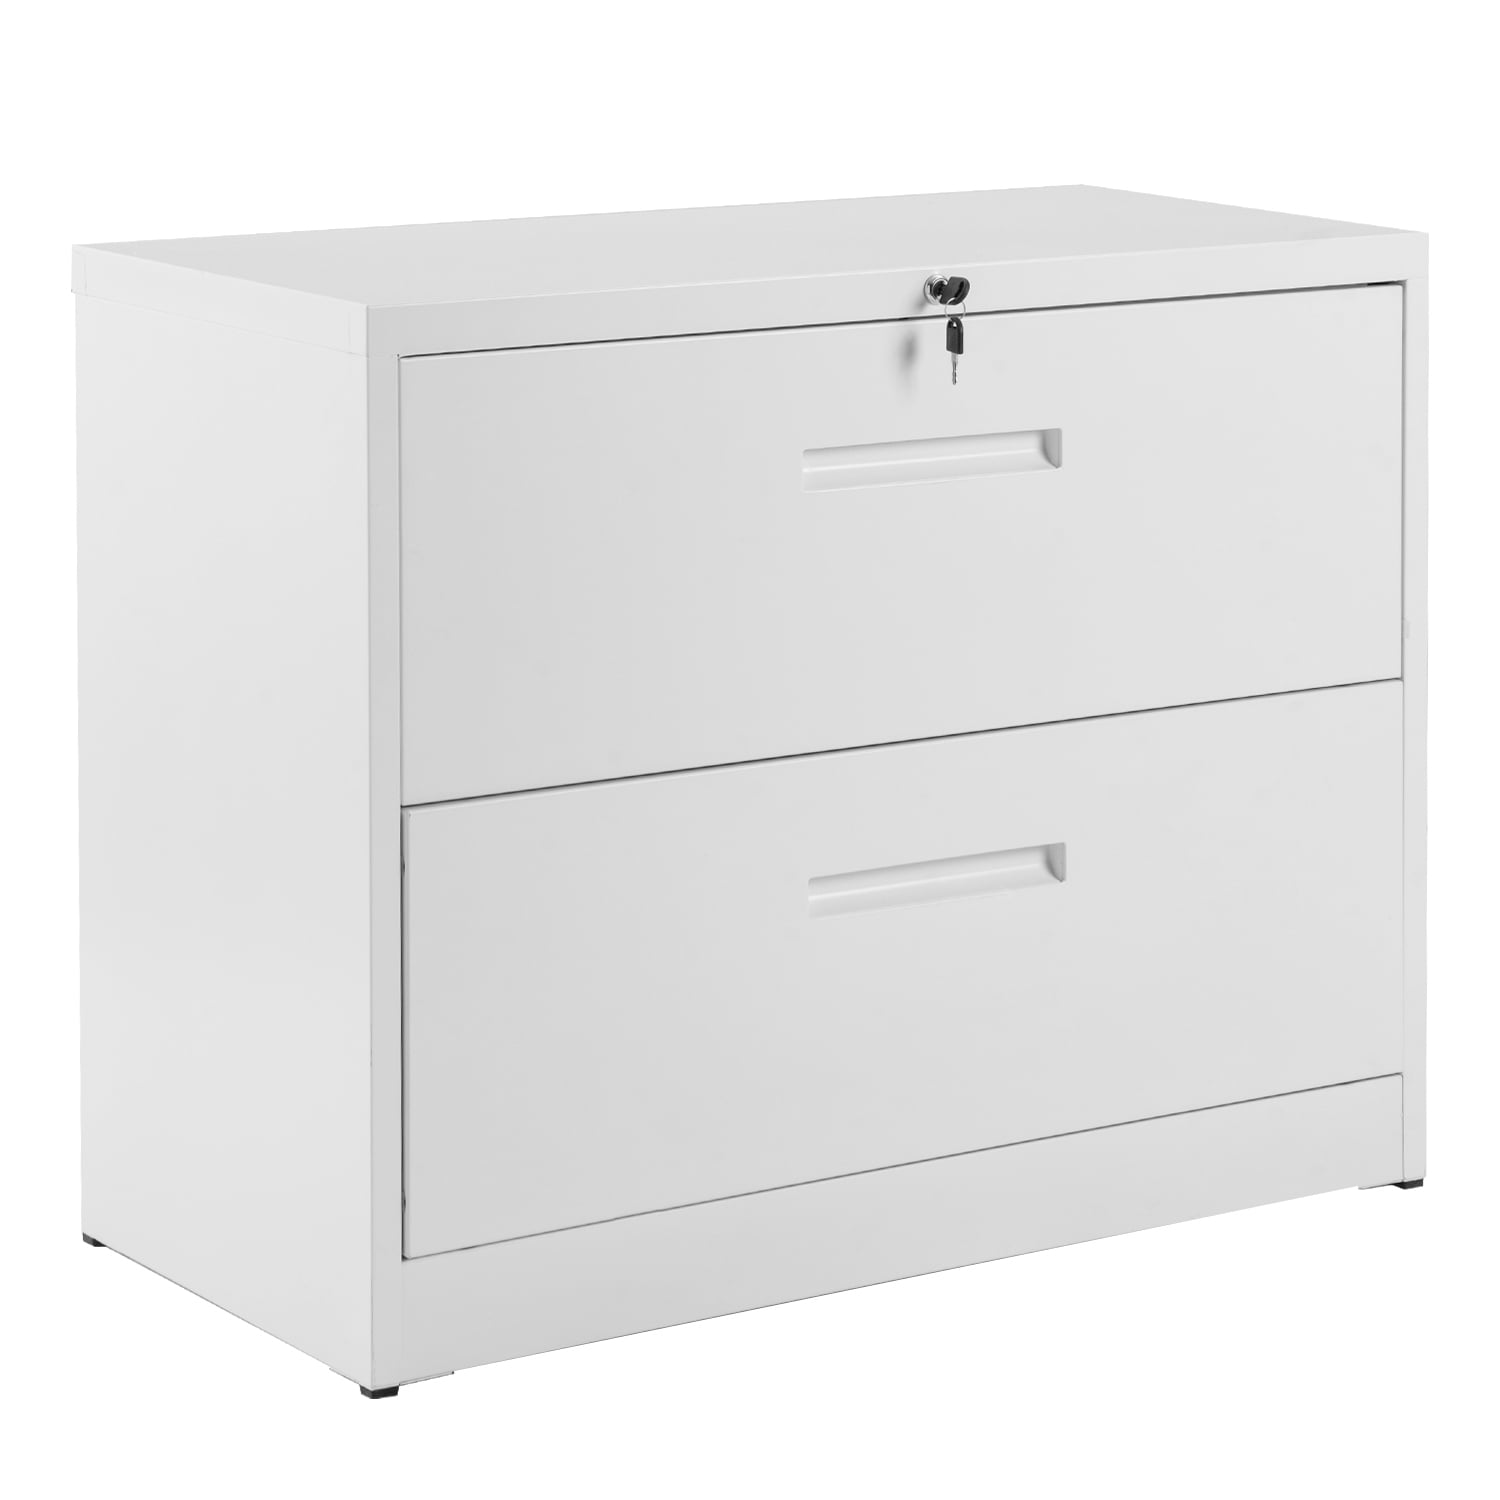 Metal File Cabinet 2 Drawer Heavy Duty Lateral File Cabinet With Lock Filing Cabinet In Home Sturdy Steel Storage Cabinet For Holding The Hanging Files Top Weight Capacity Of 220 Lbs Q1941 Walmart Com